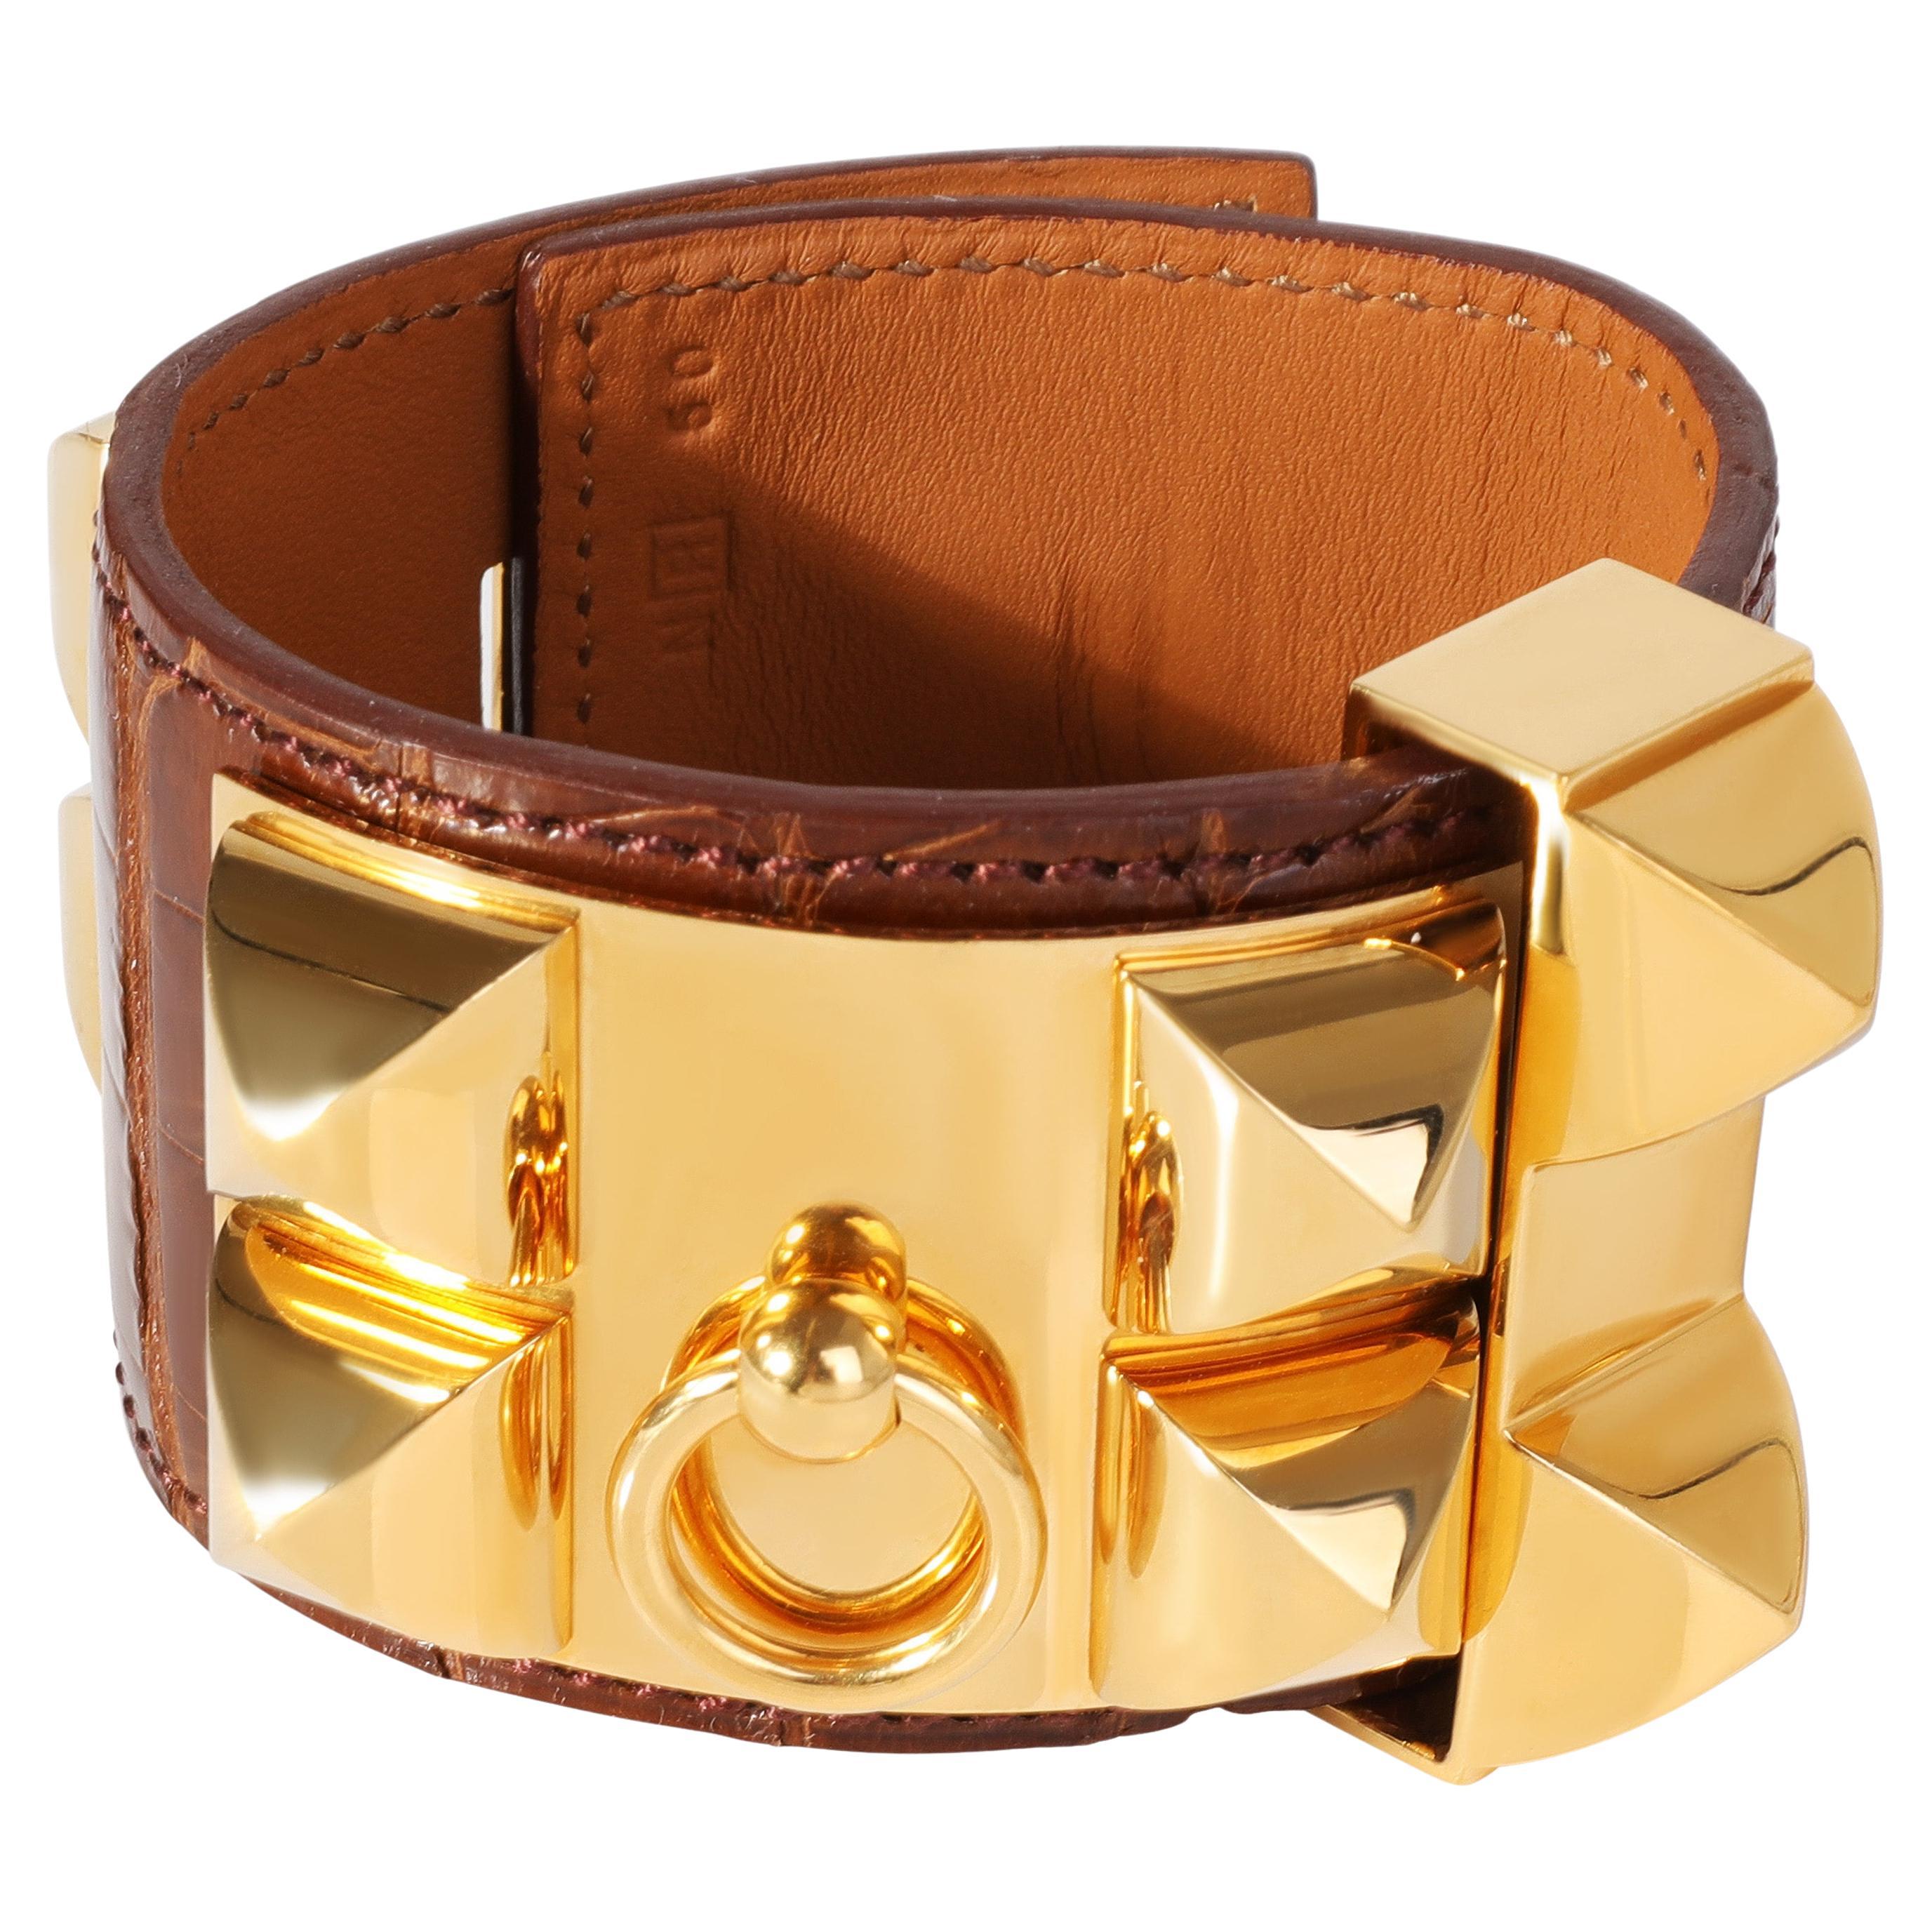 Hermes Collier De Chien Brown Leather Gold Tone Cuff For Sale